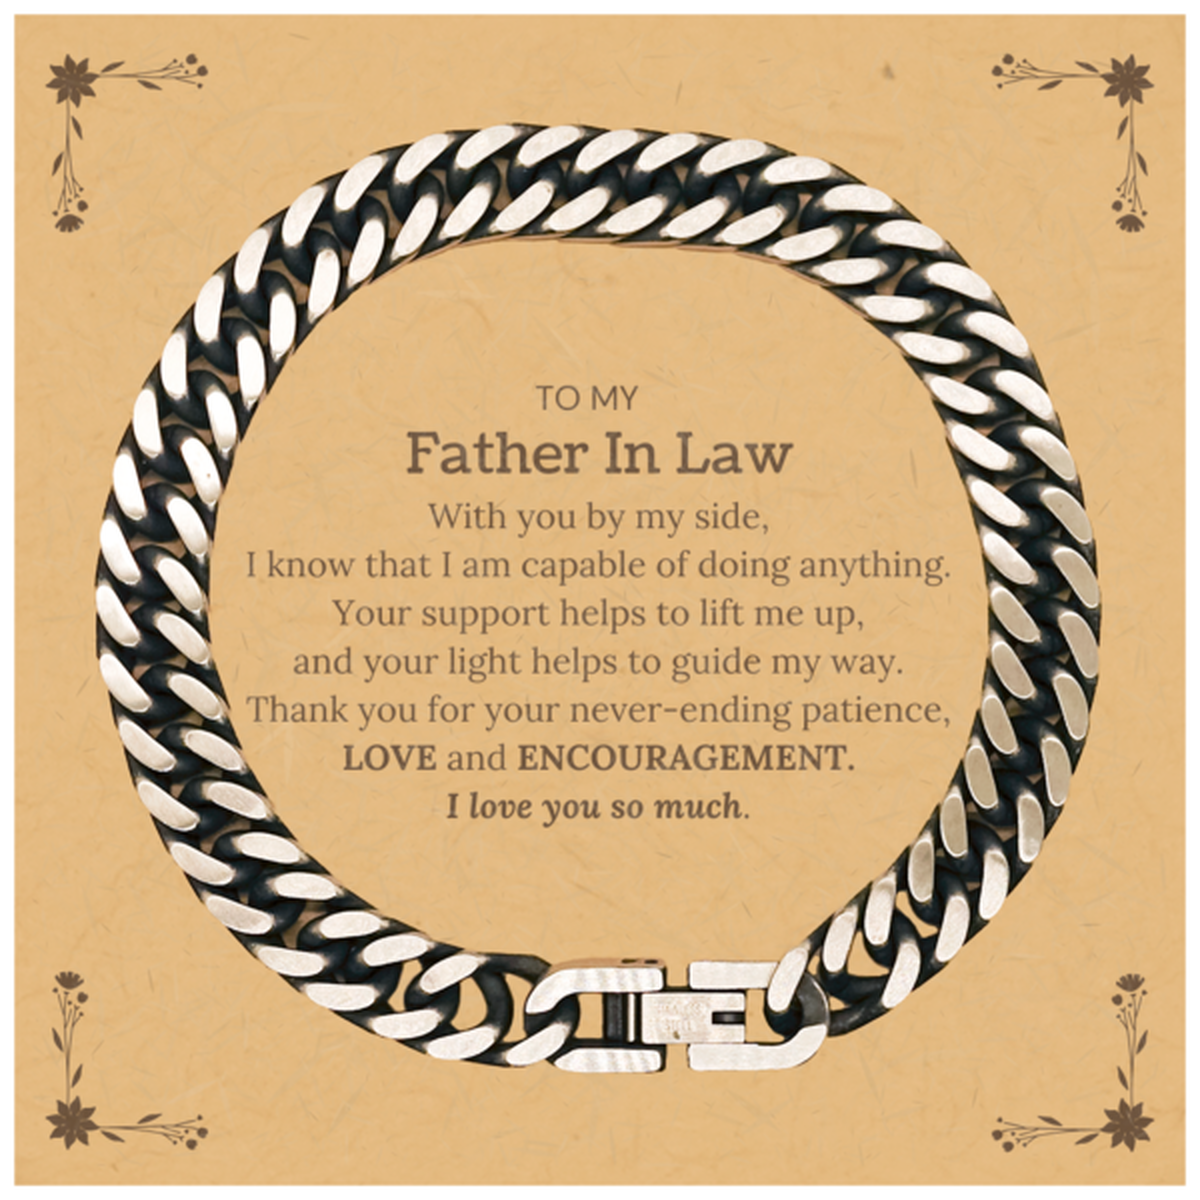 Appreciation Father In Law Cuban Link Chain Bracelet Gifts, To My Father In Law Birthday Christmas Wedding Keepsake Gifts for Father In Law With you by my side, I know that I am capable of doing anything. I love you so much